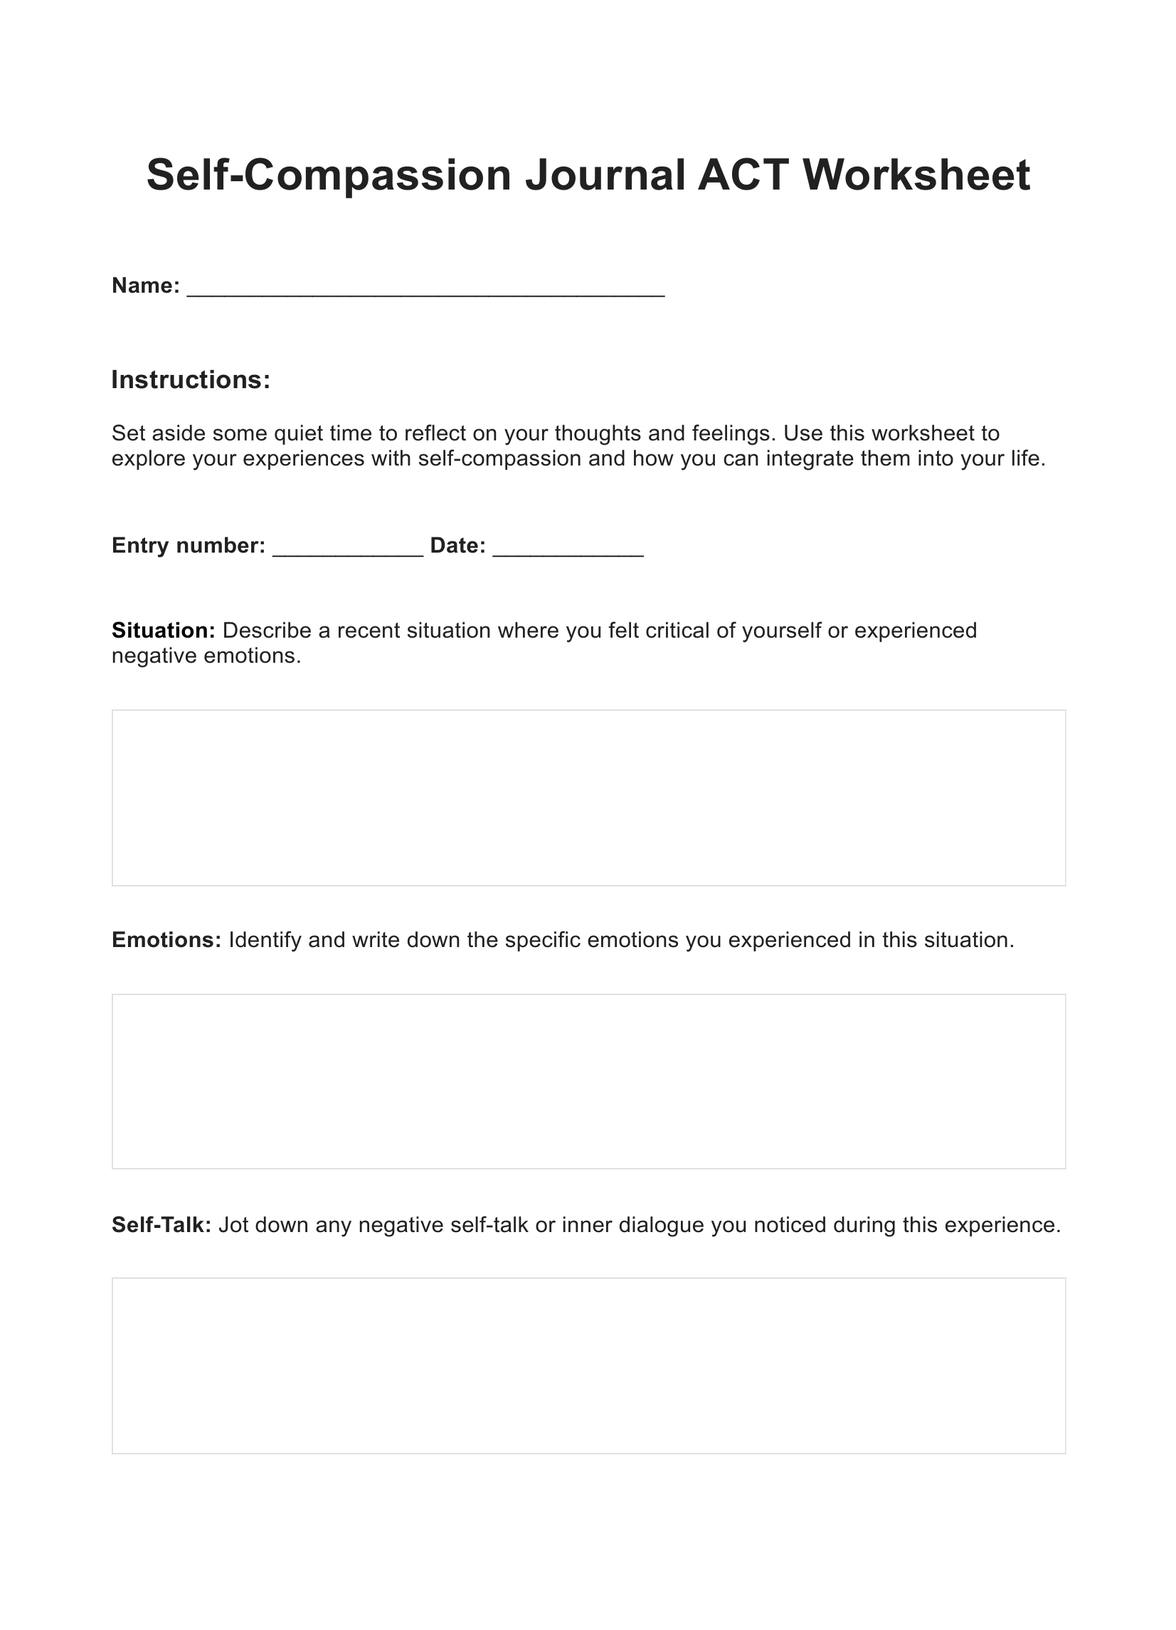 Self-compassion Journal ACT Worksheets PDF Example